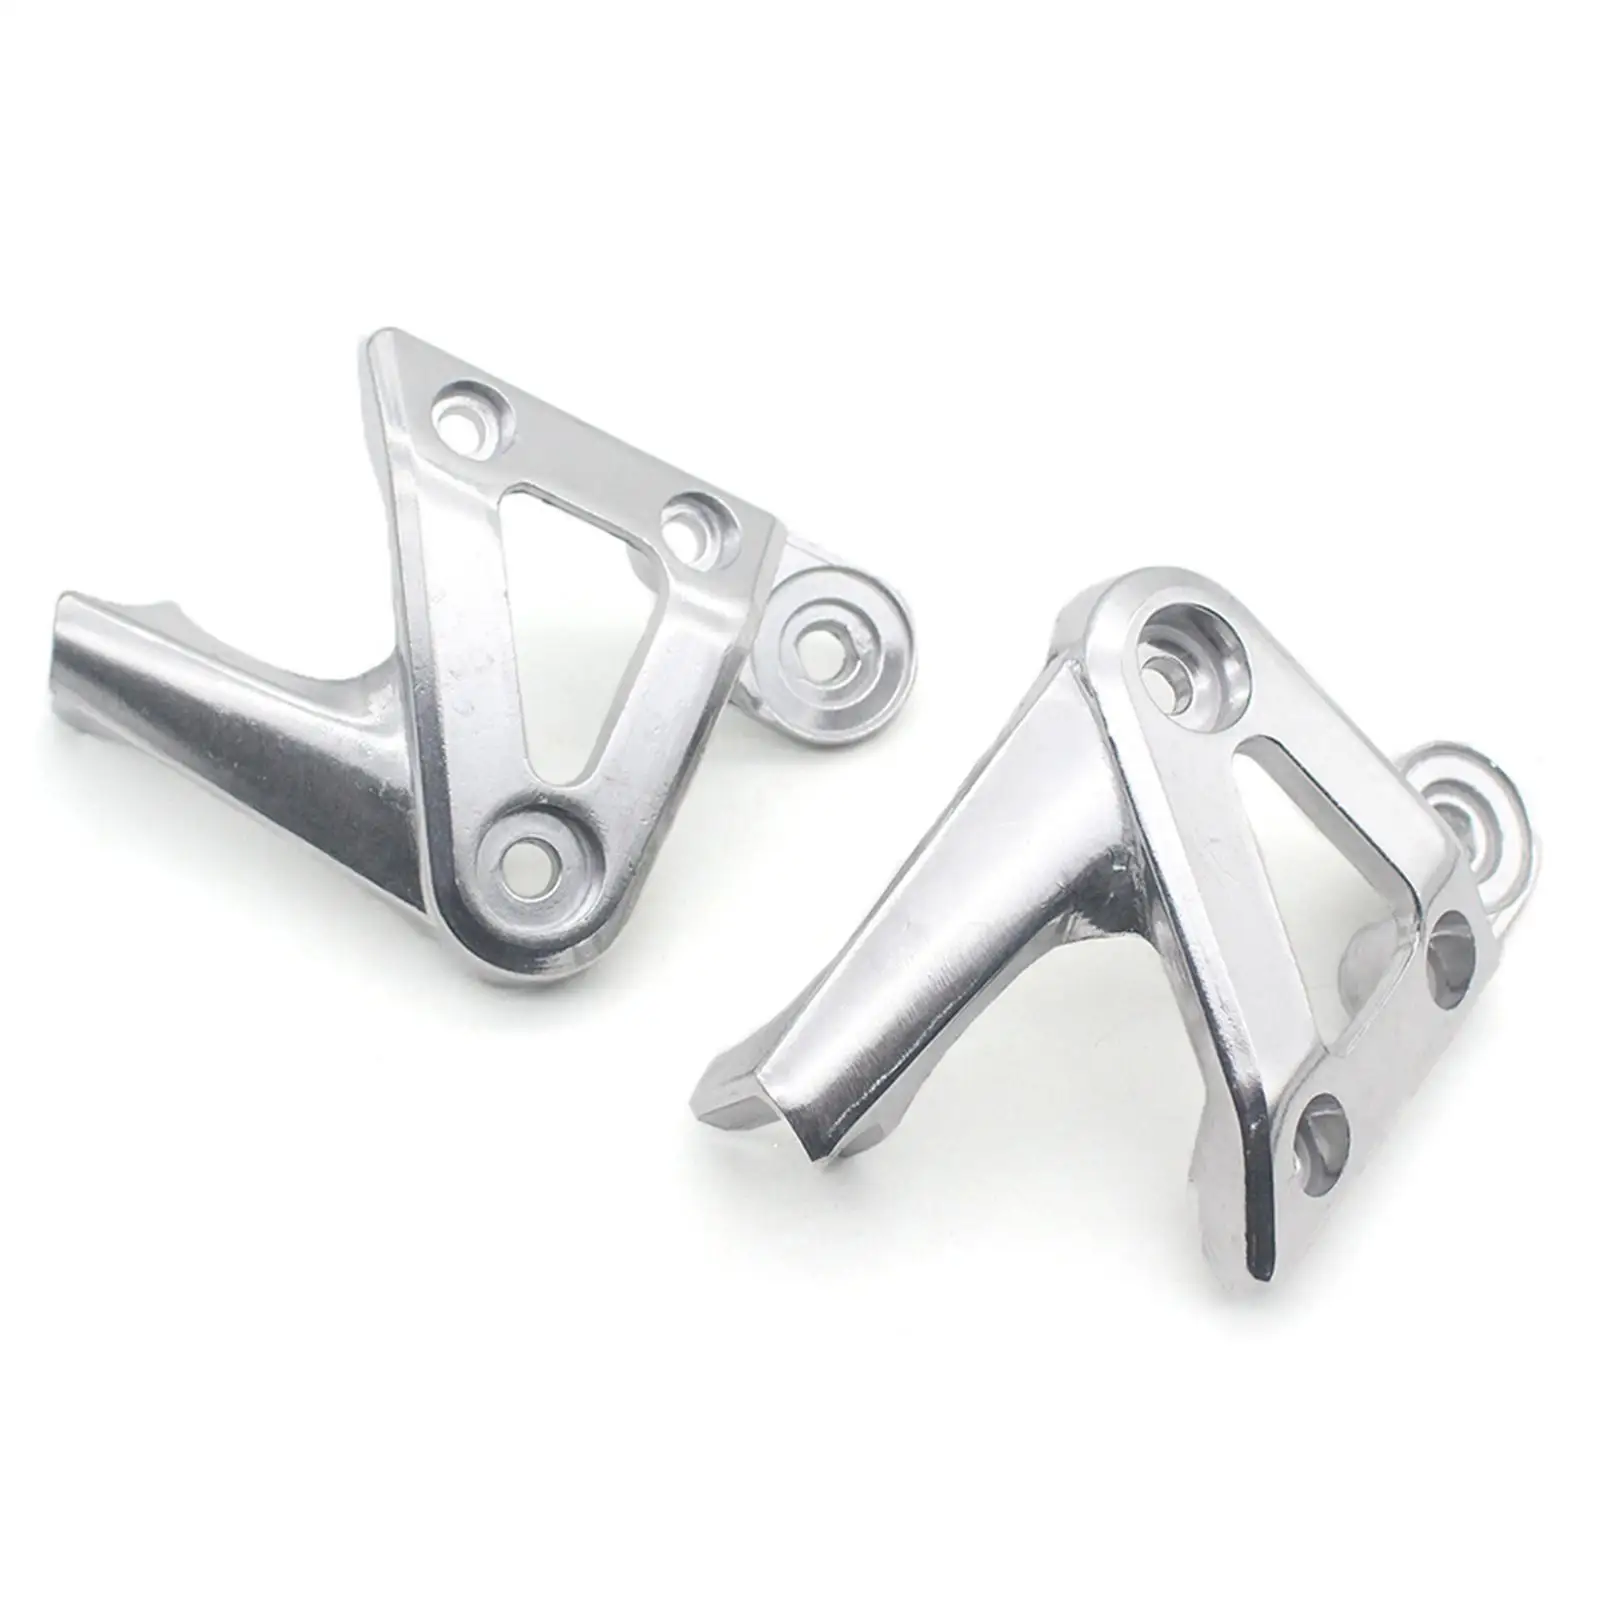 1 Set Motorcycle Headlight Holders Brackets, for  0  1/2/3 1999-2008, Motorcycle  Acc